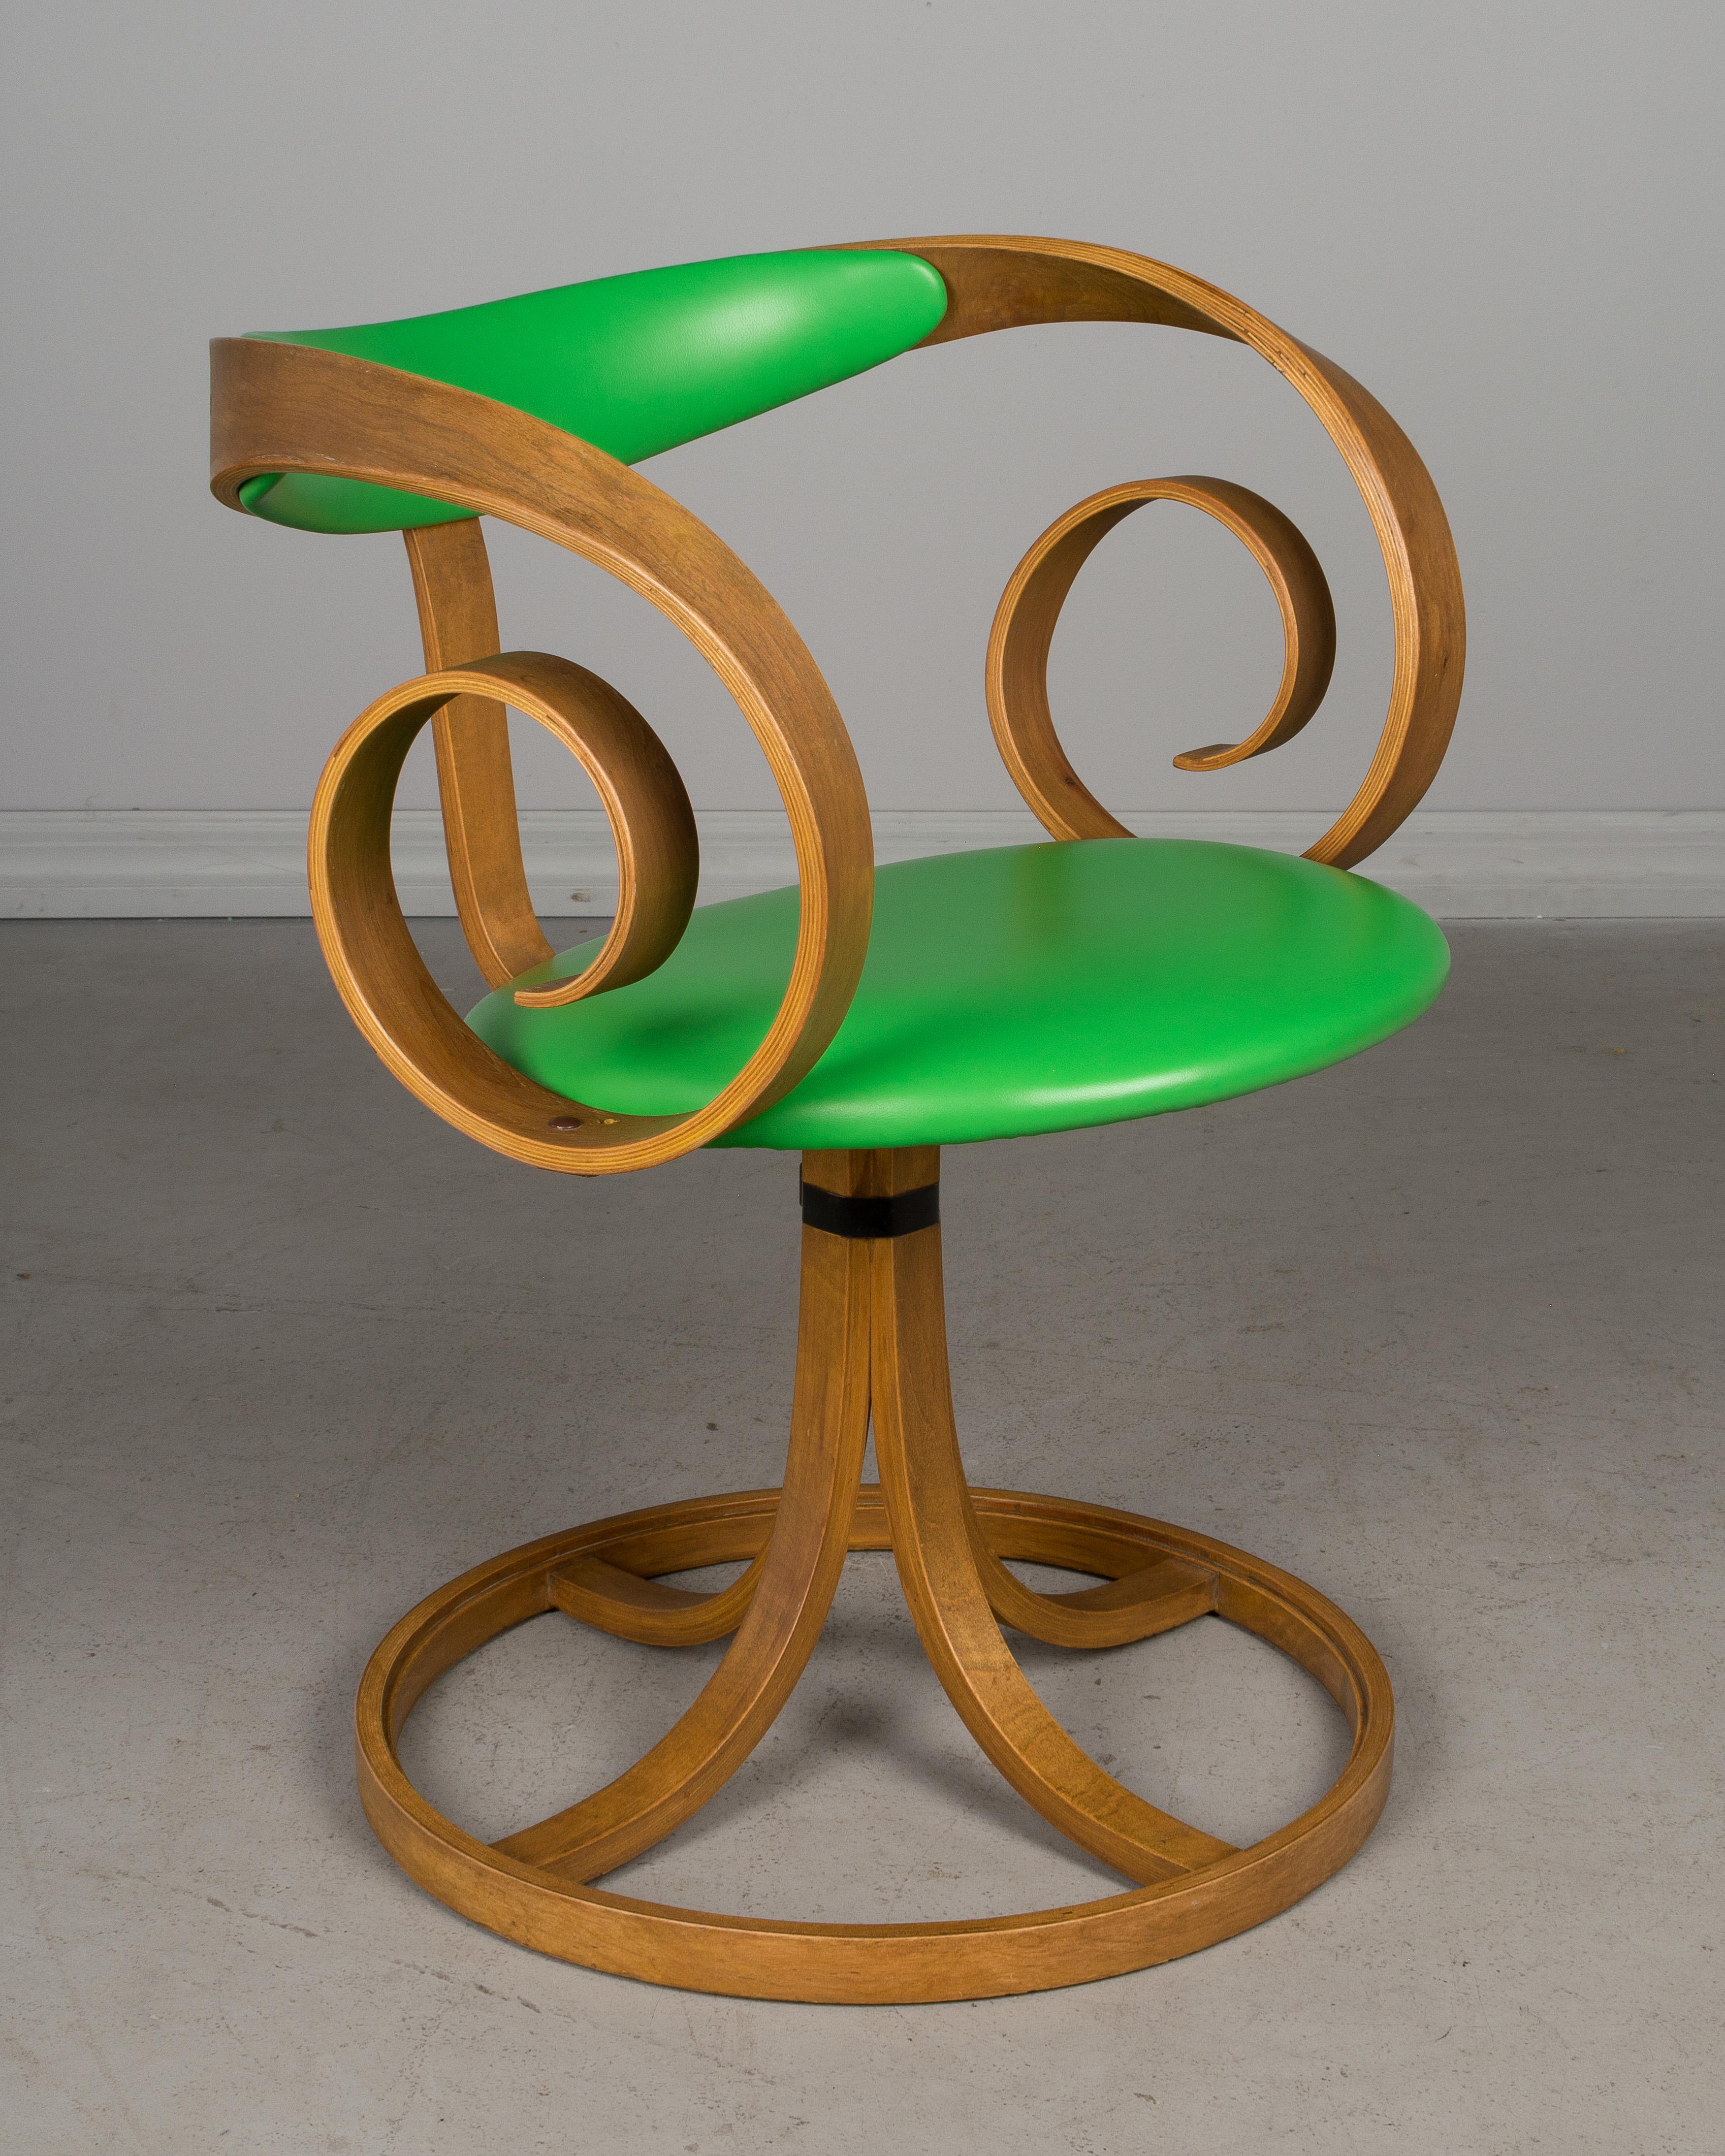 A Mid-Century Modern Sultana swivel chair designed by George Mulhauser for Plycraft. Bent plywood frame with scroll arms and sturdy pedestal base. Original bright green vinyl seat and backrest. Missing an enameled nailhead on one of the arms.